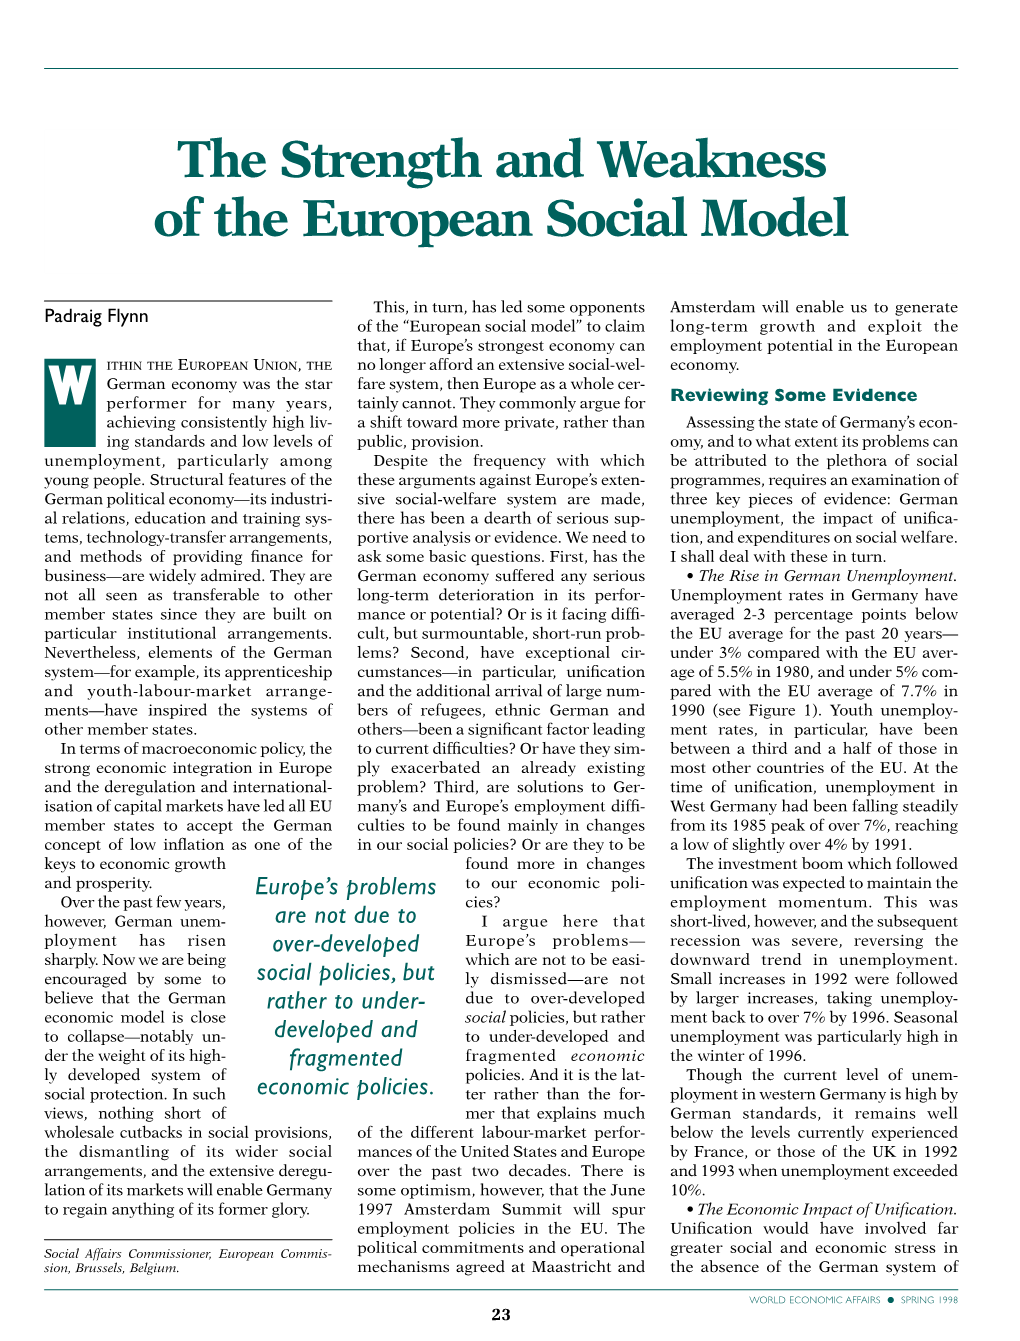 The Strength and Weakness of the European Social Model